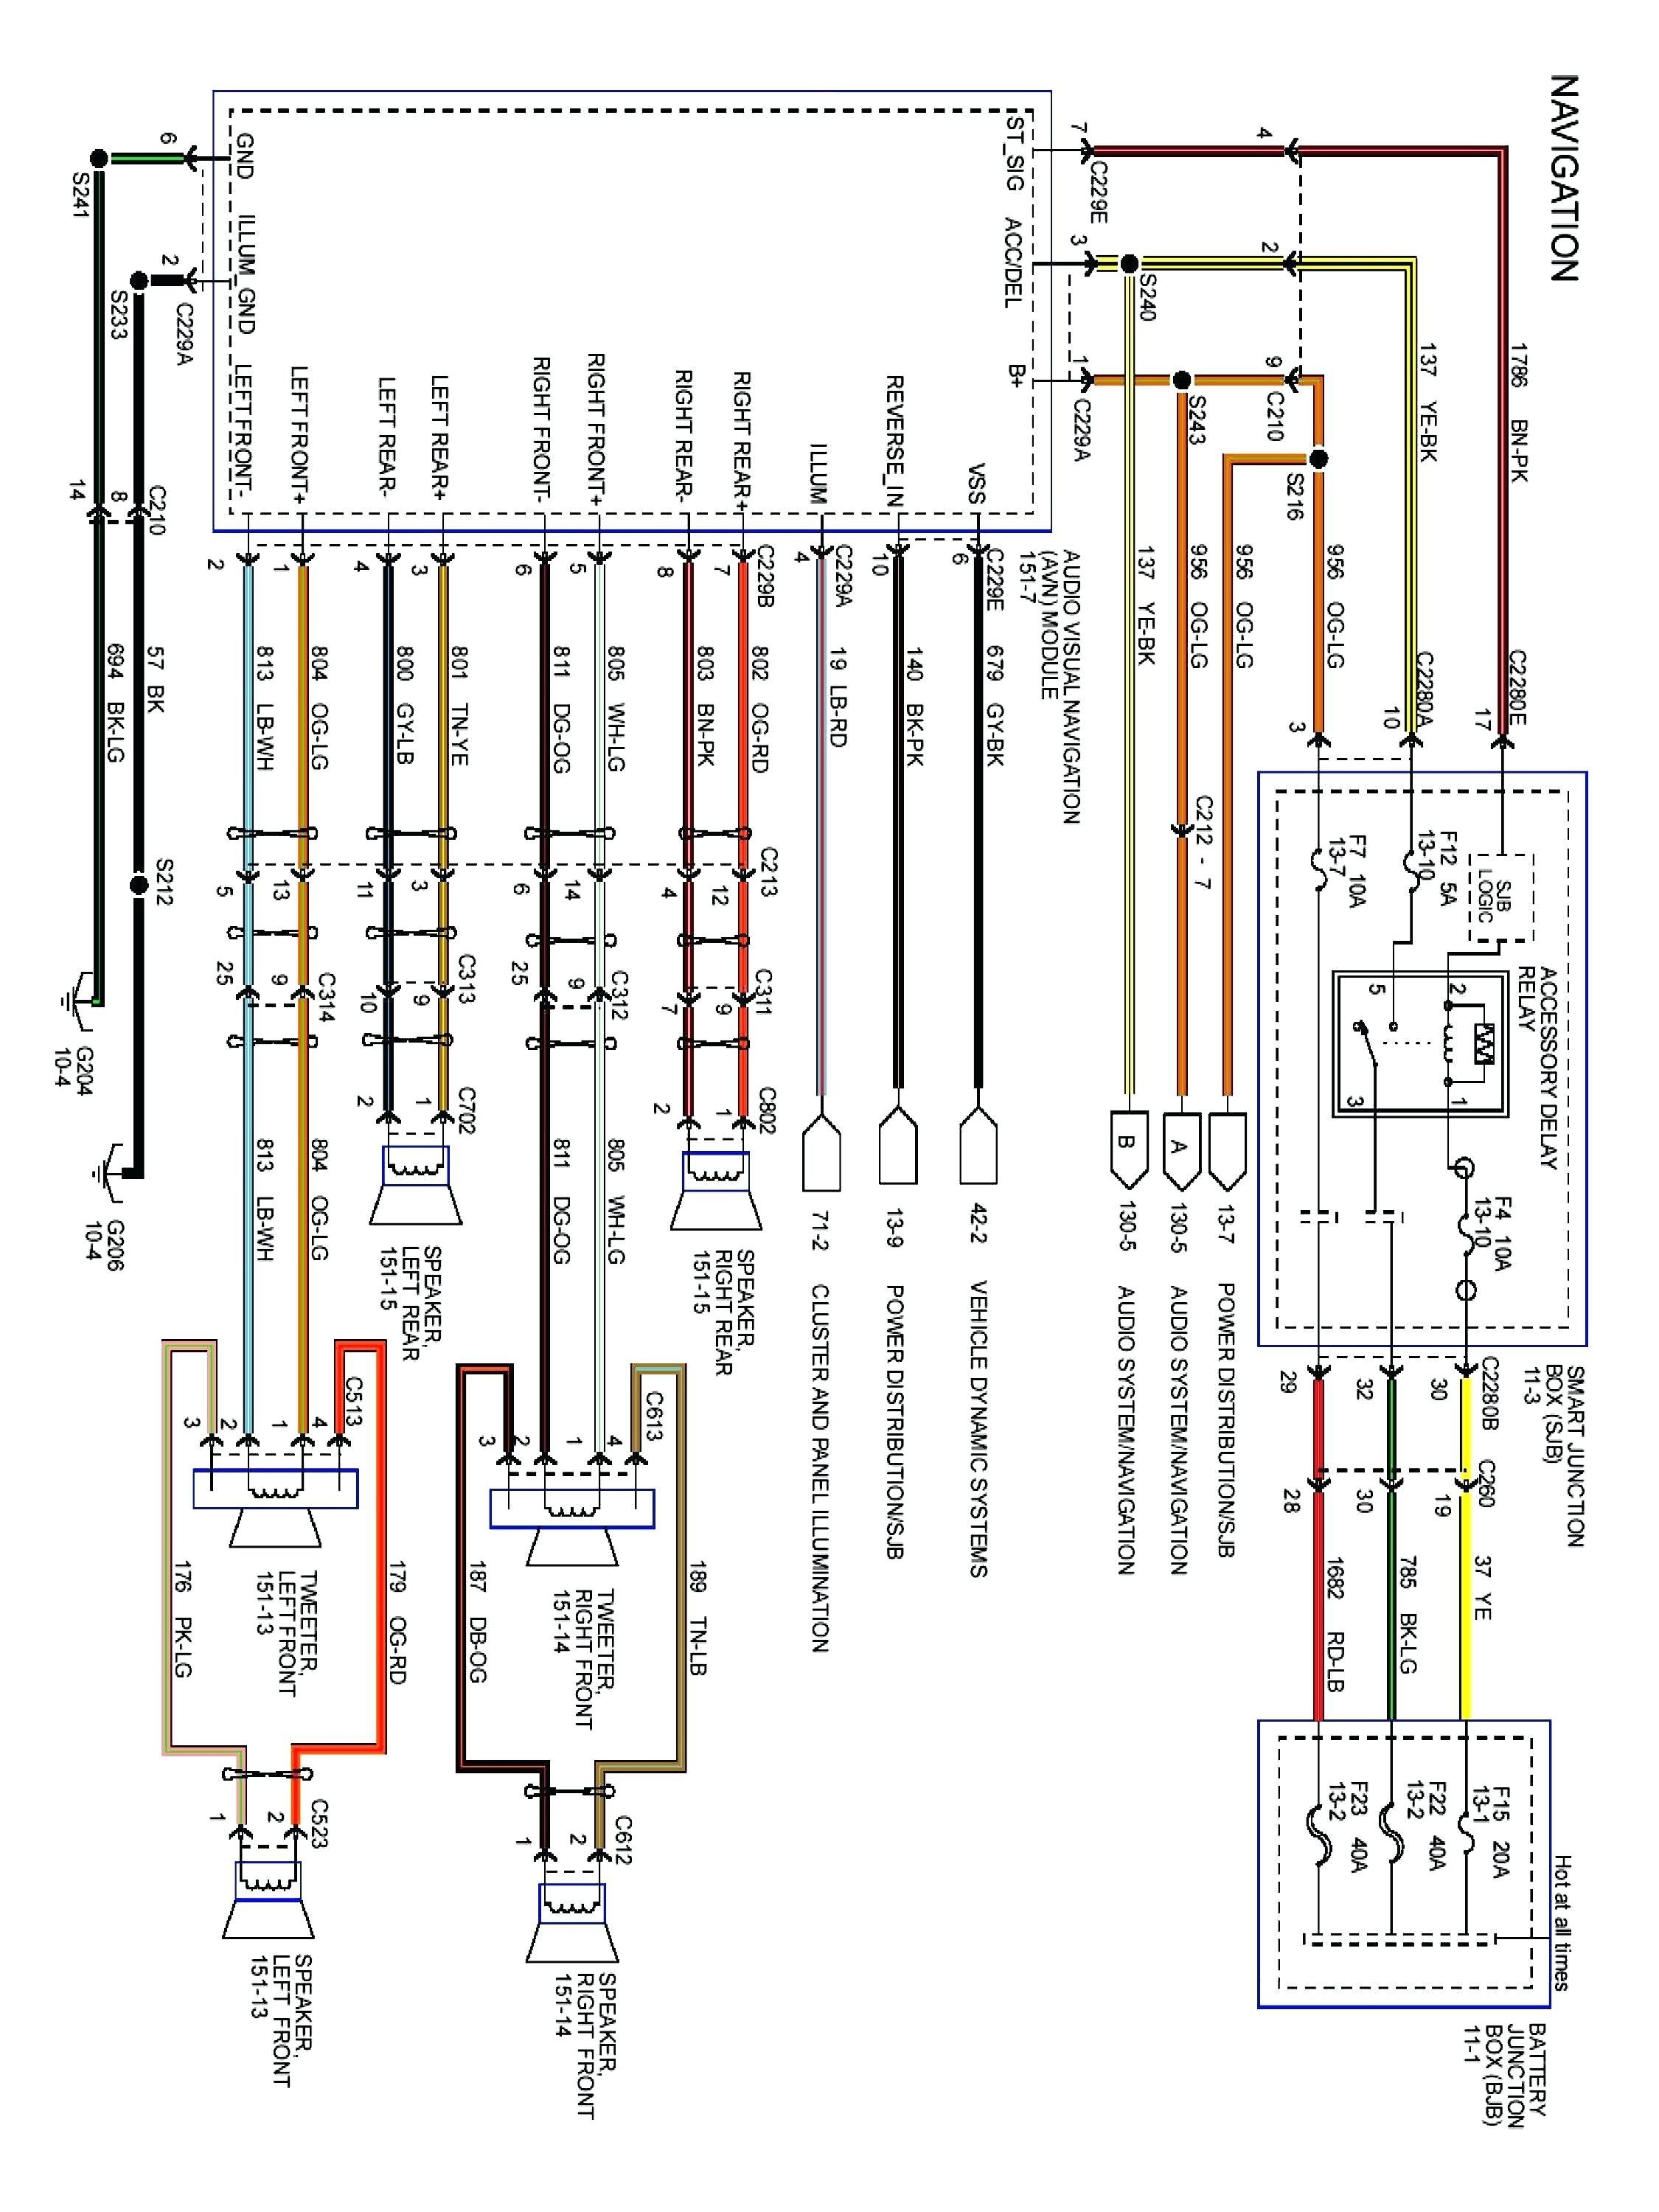 Free ford Wiring Diagrams Lovely Diagram 2005 ford Focus Radio